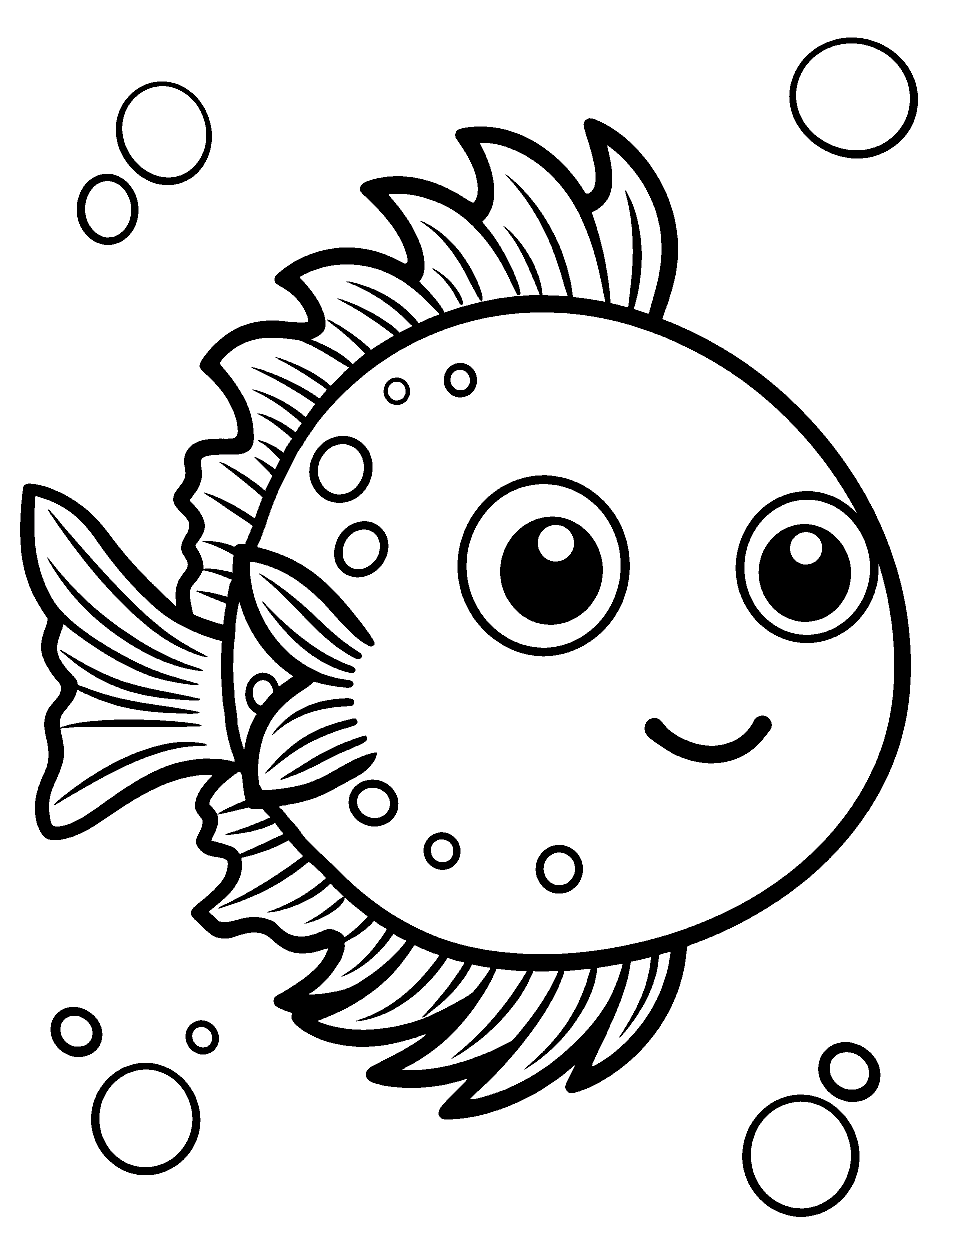 Kawaii Pufferfish Fish Coloring Page - A kawaii-style pufferfish with big, sparkly eyes, ready to be colored.